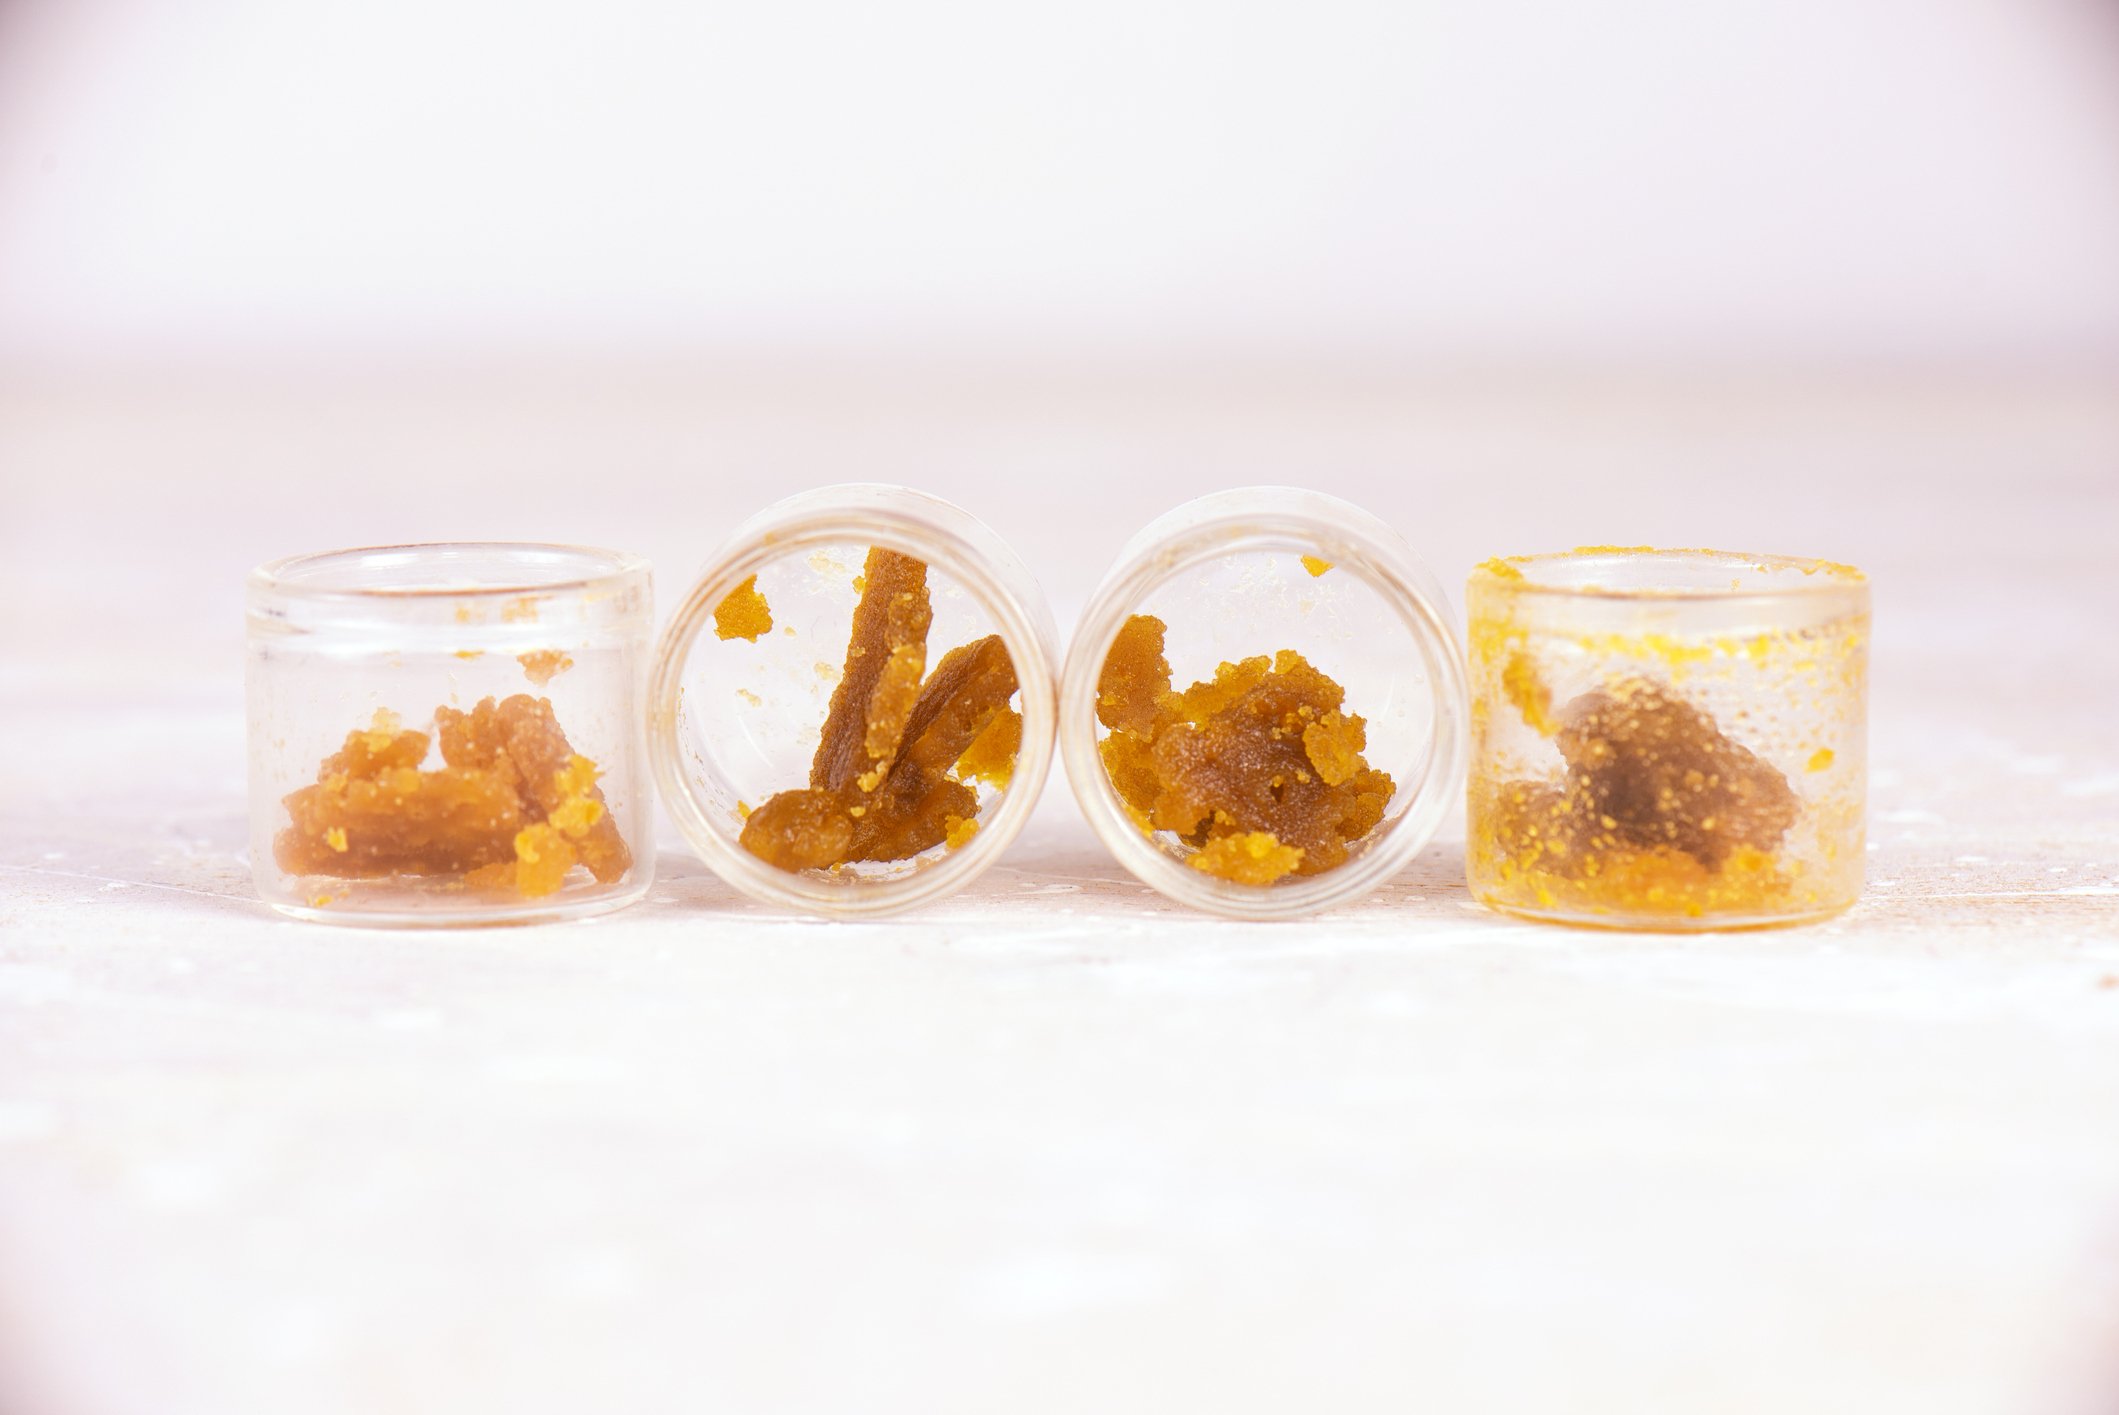 Assorted marijuana extraction concentrate aka wax crumble on jars isolated on white